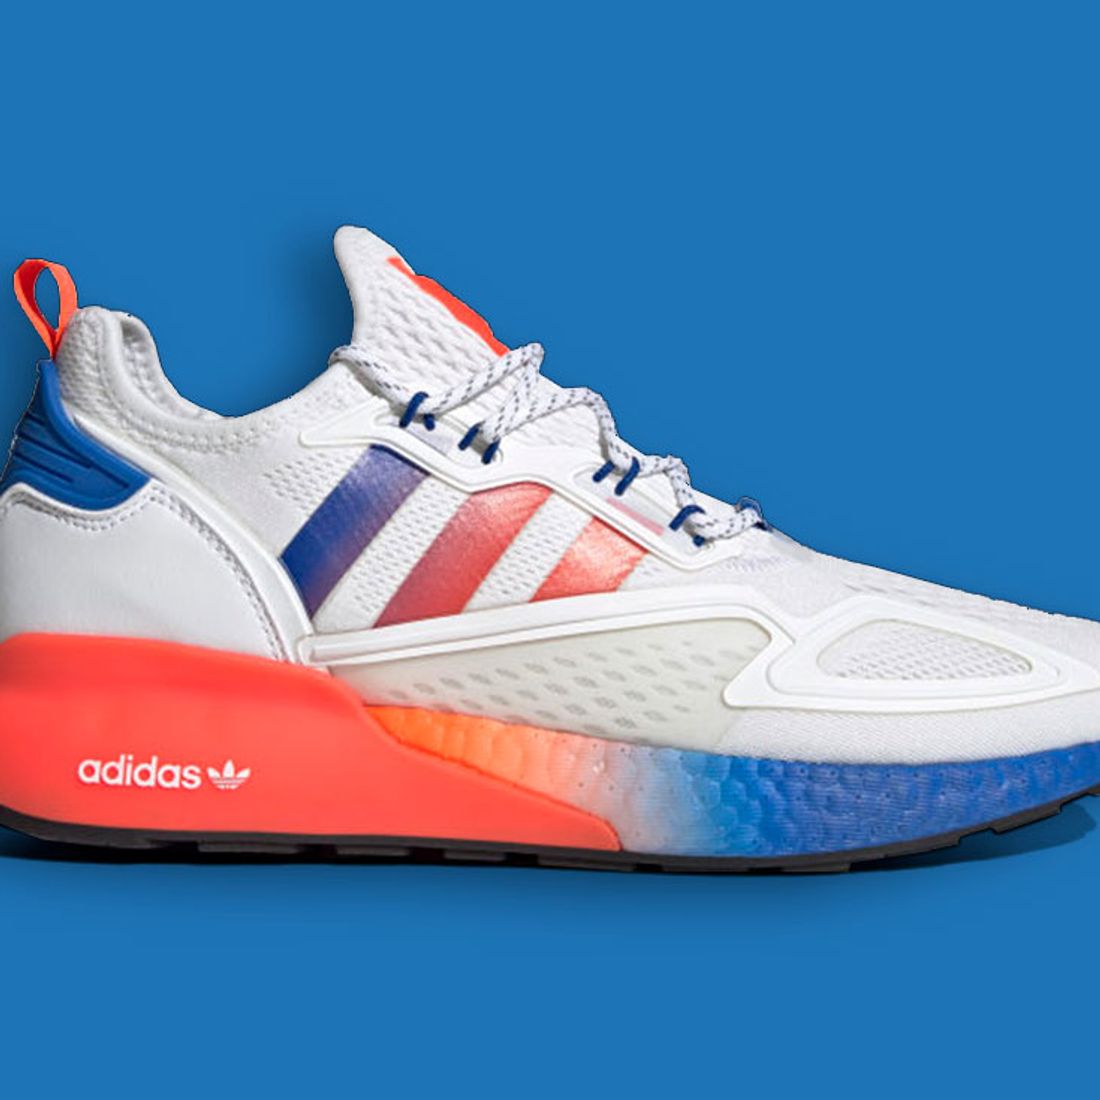 Squishy ZXience: The adidas ZX 2K BOOST has Sole! -